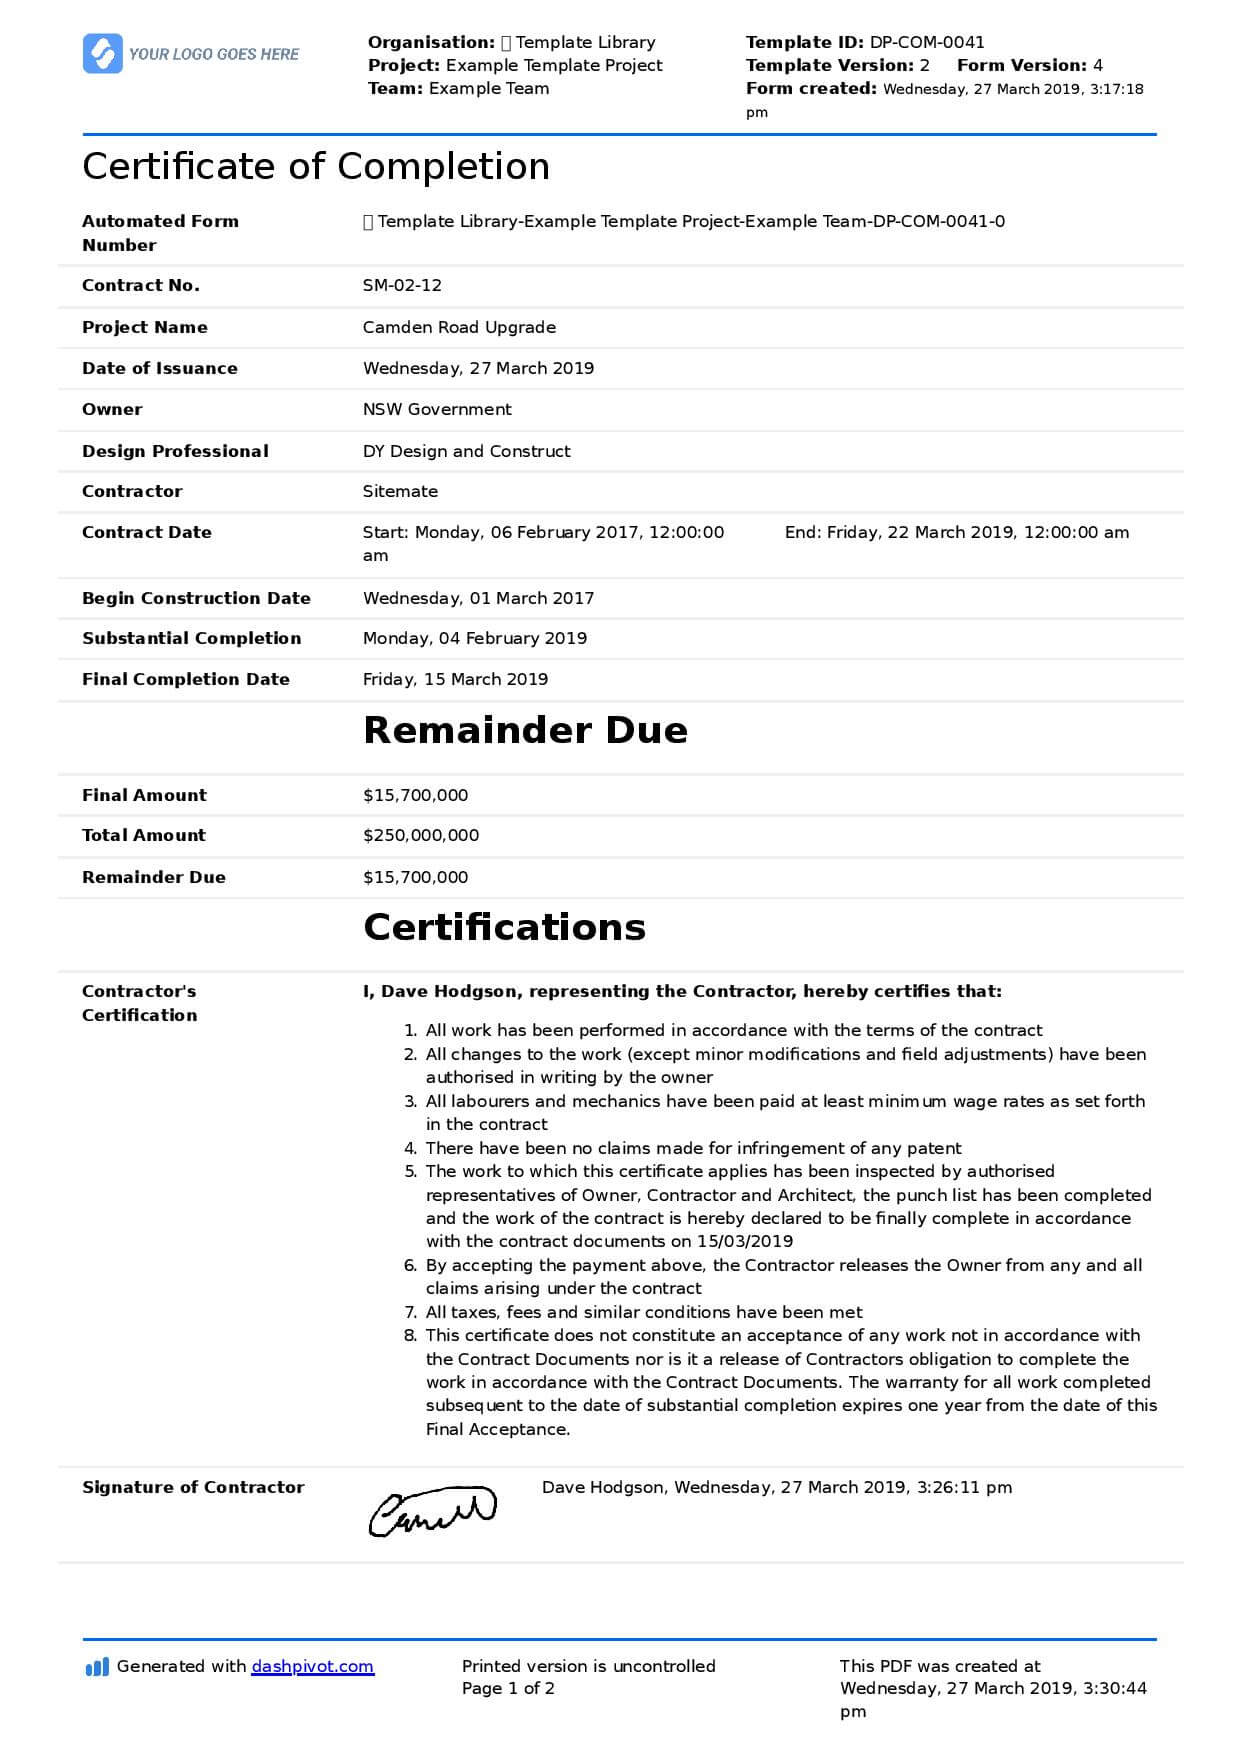 Certificate Of Completion For Construction (Free Template + With Certificate Of Completion Template Construction